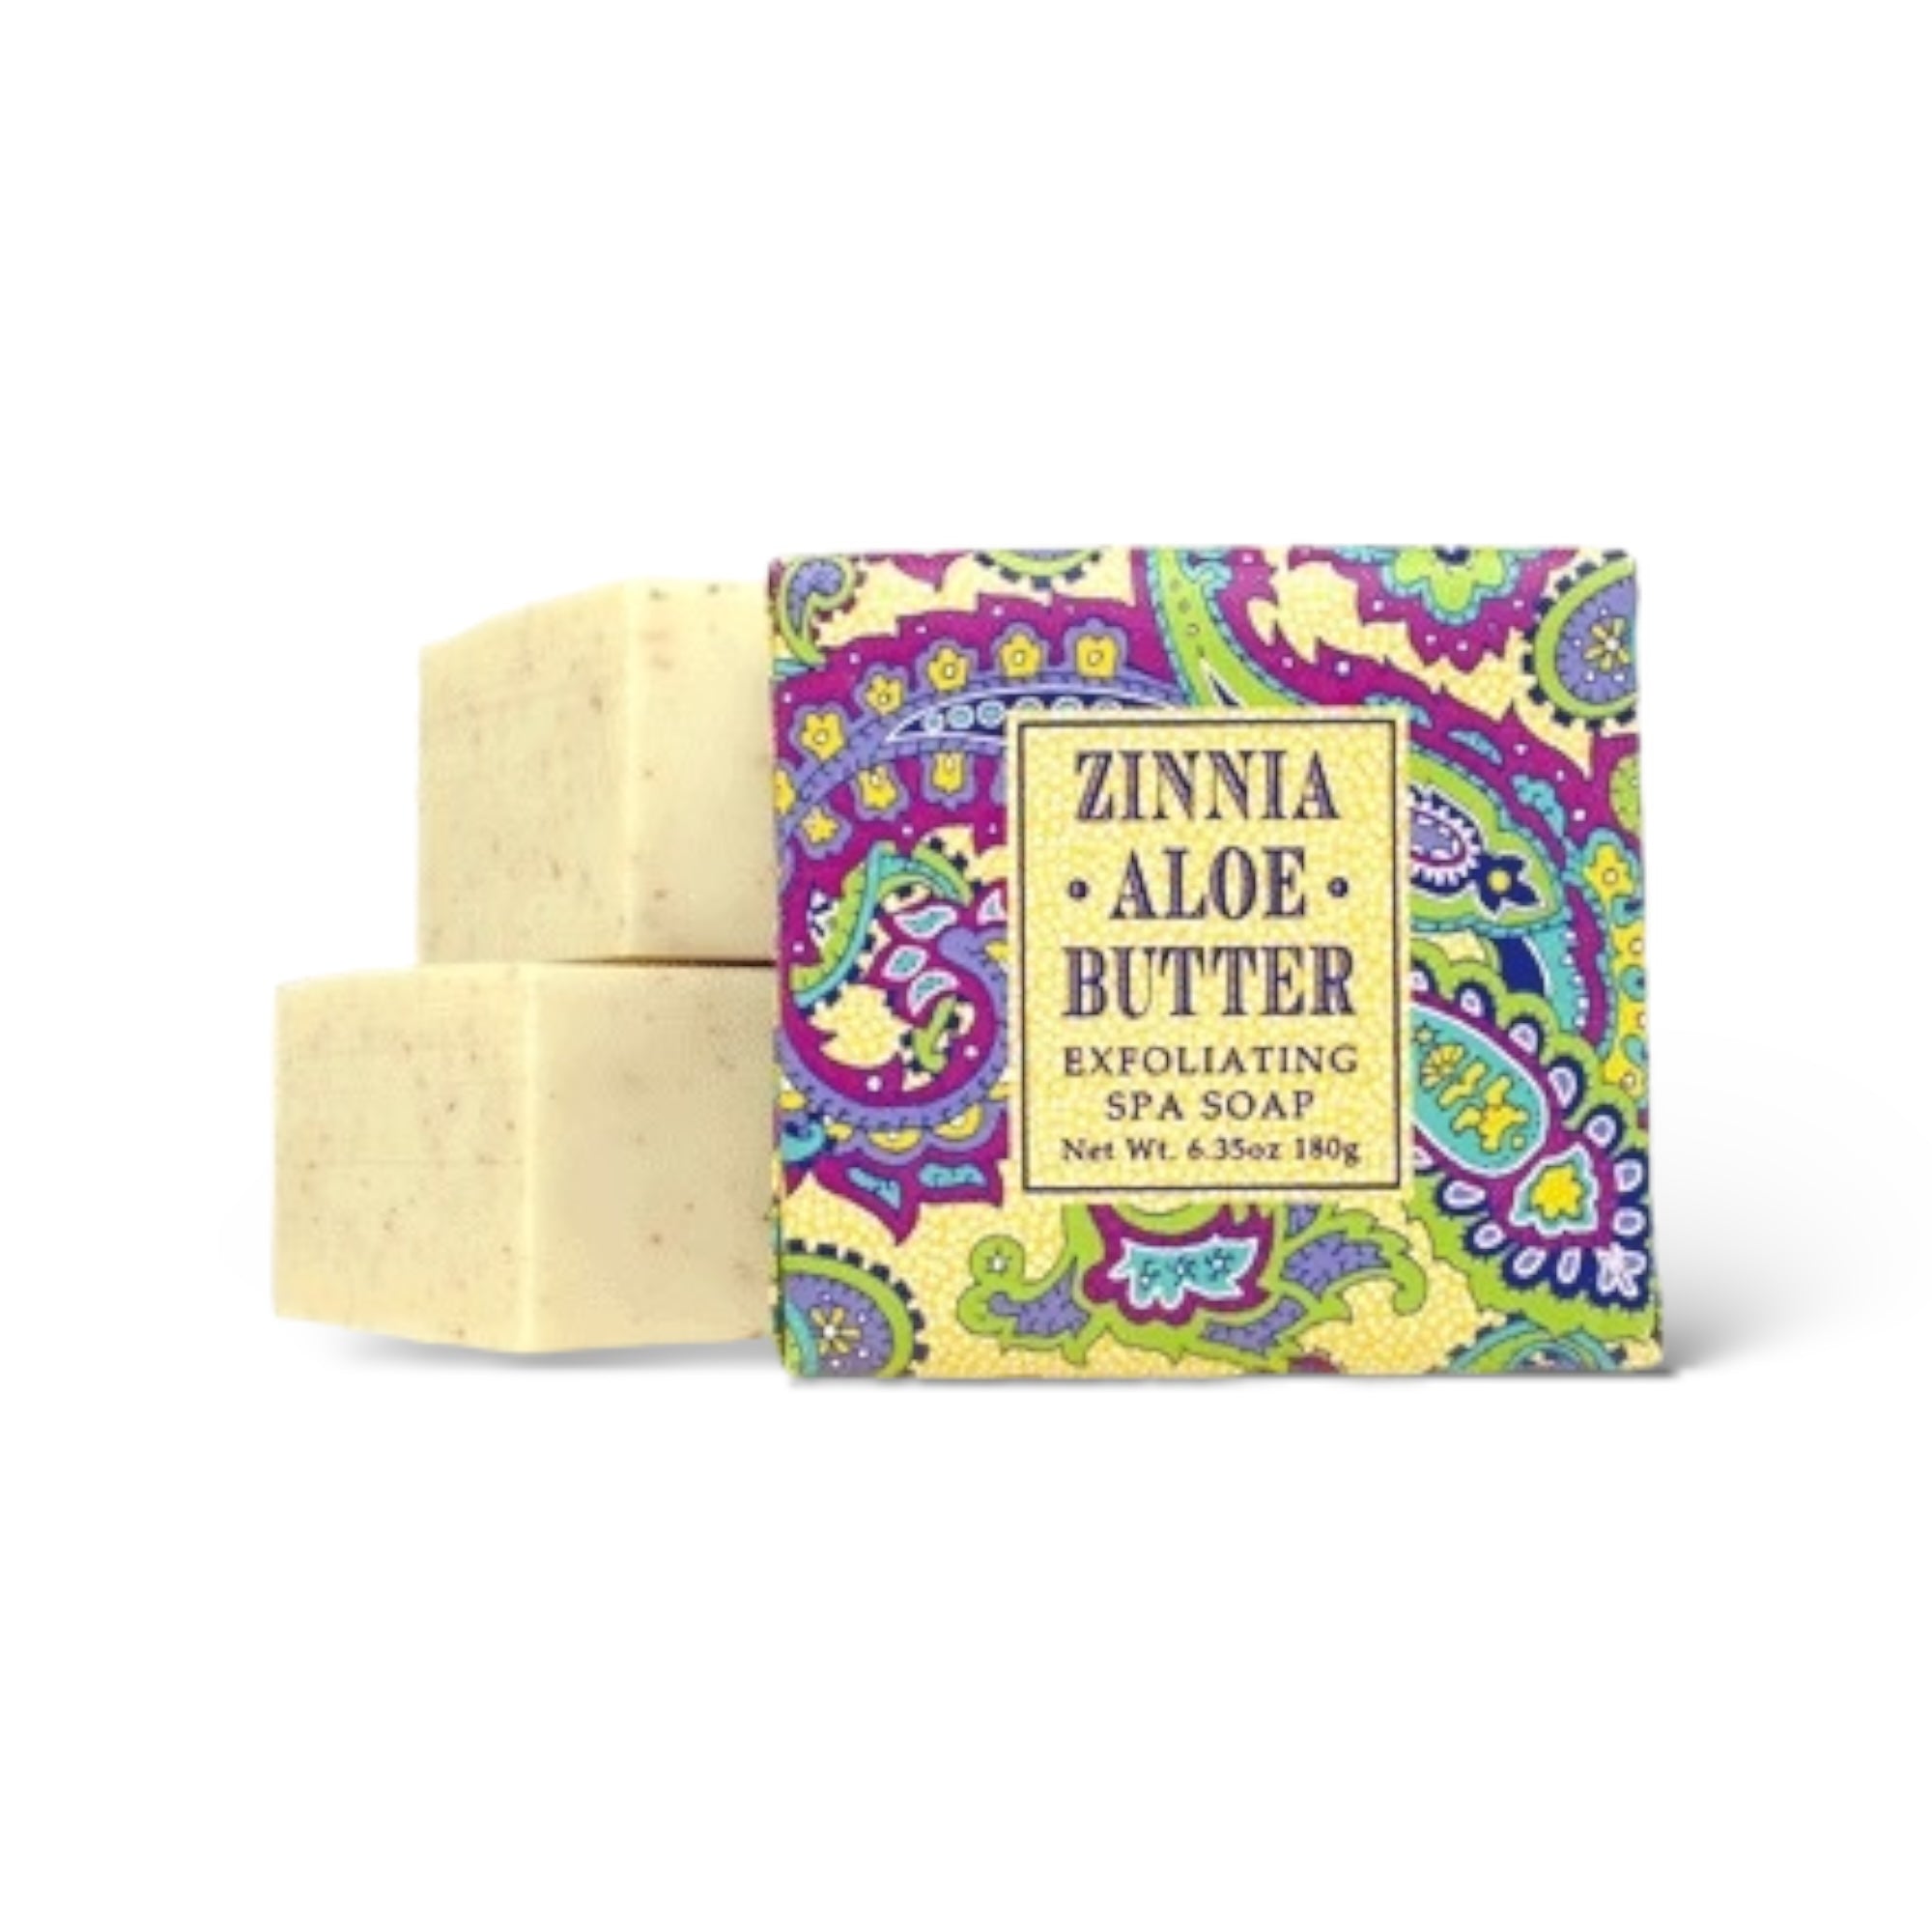 Zinnia Aloe Butter Exfoliating Spa Soap by Greenwich Bay Trading Co.